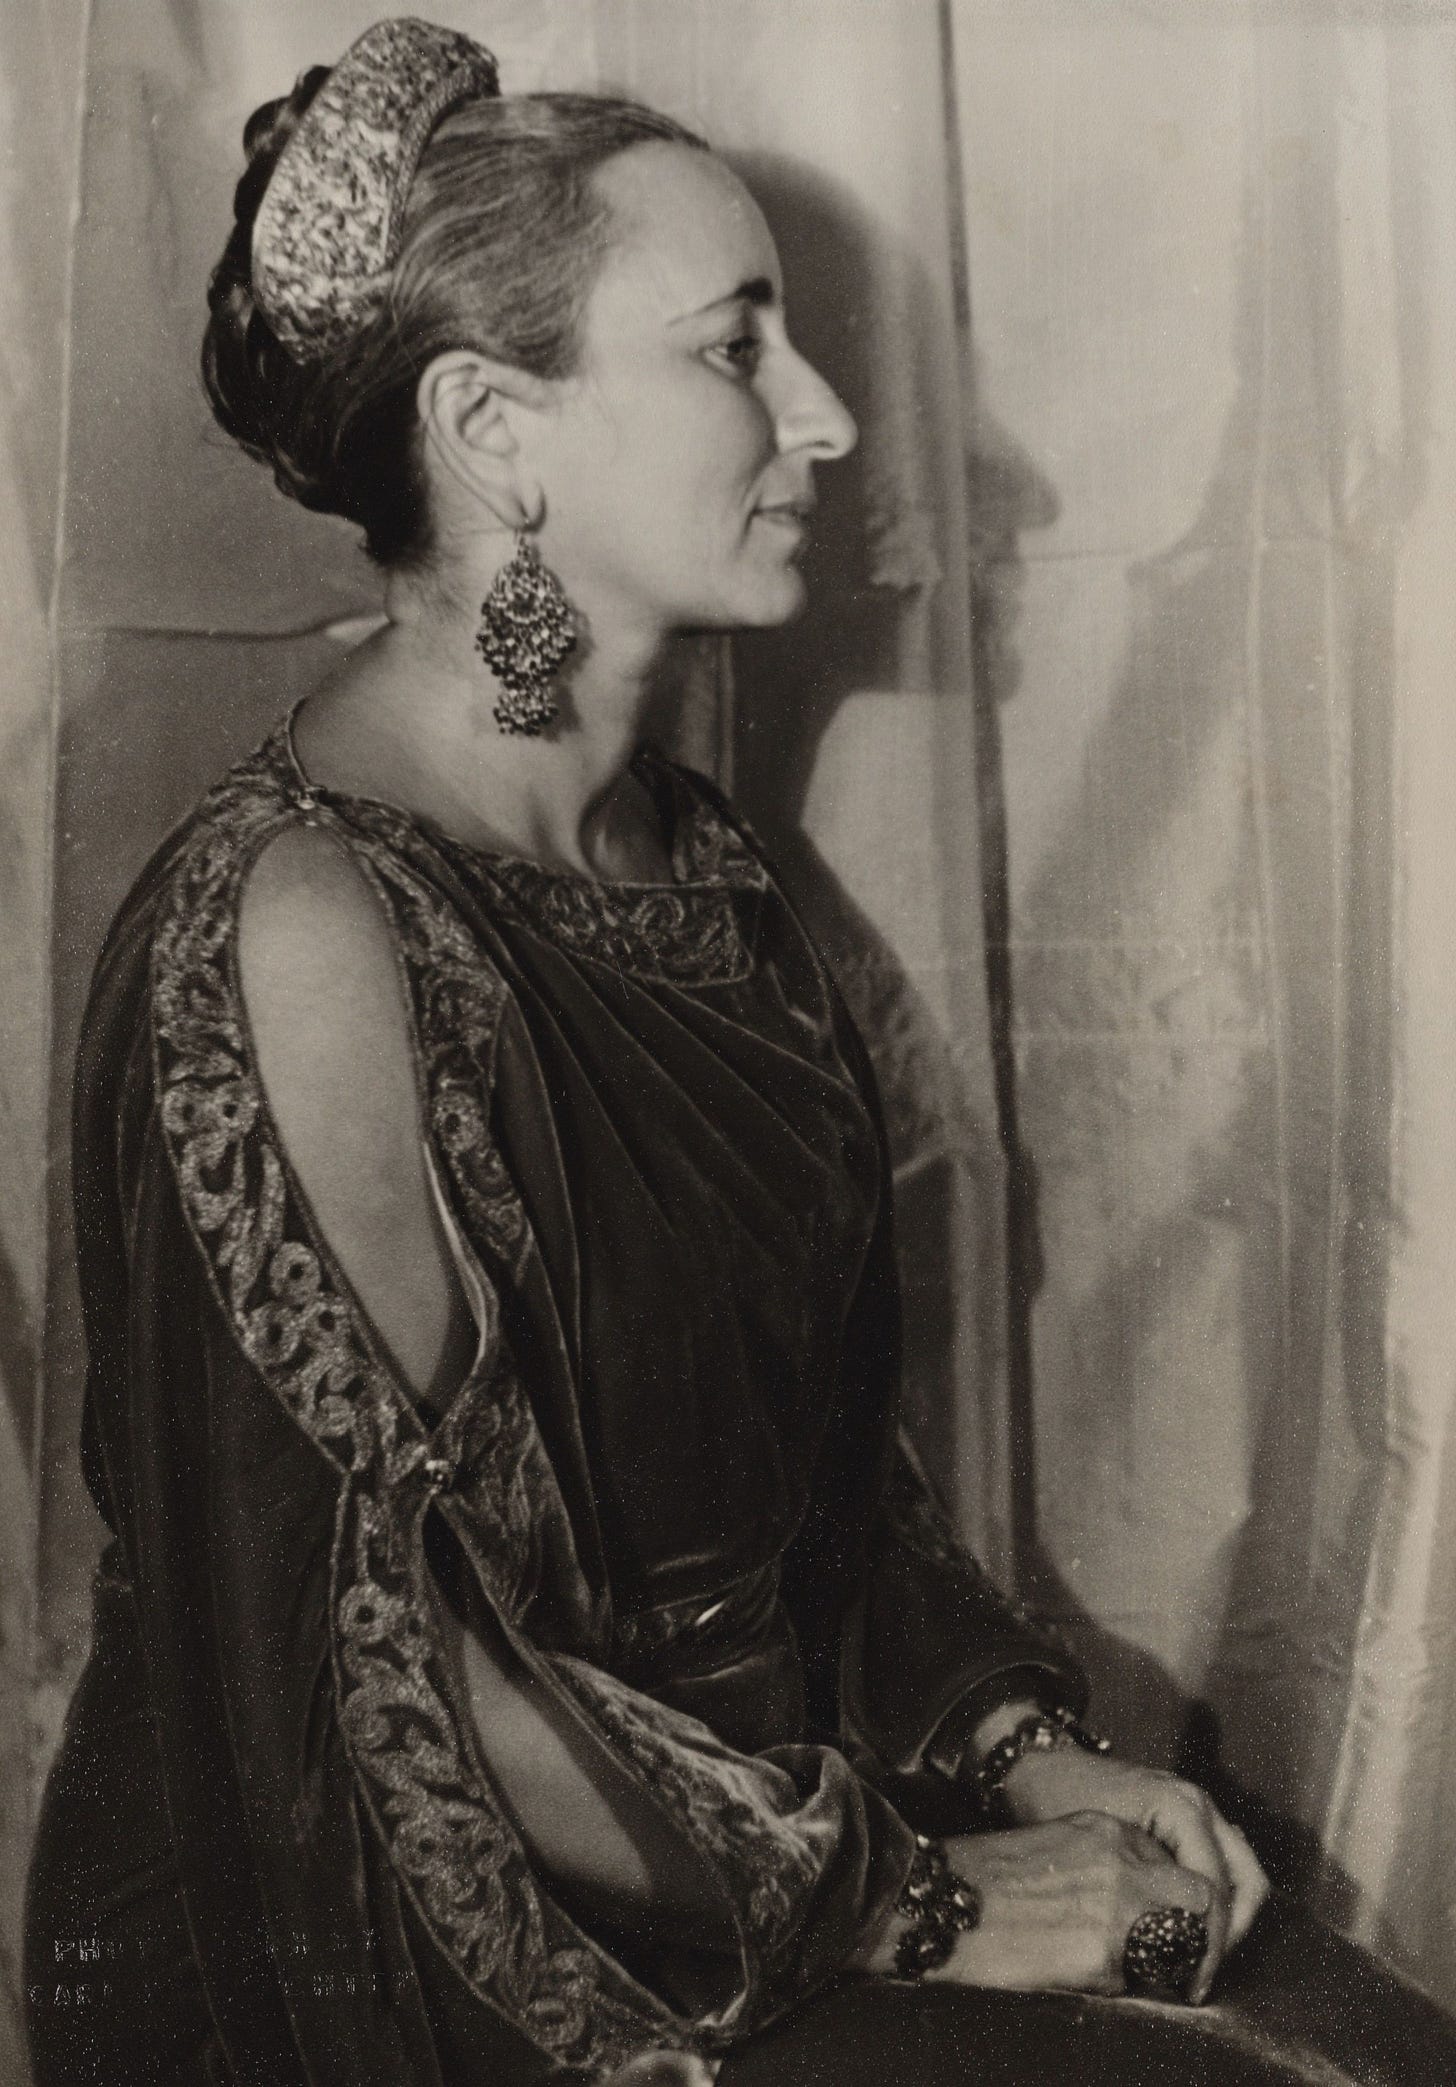 profile portrait of Bernardine dressed sumptuously, almost like a queen